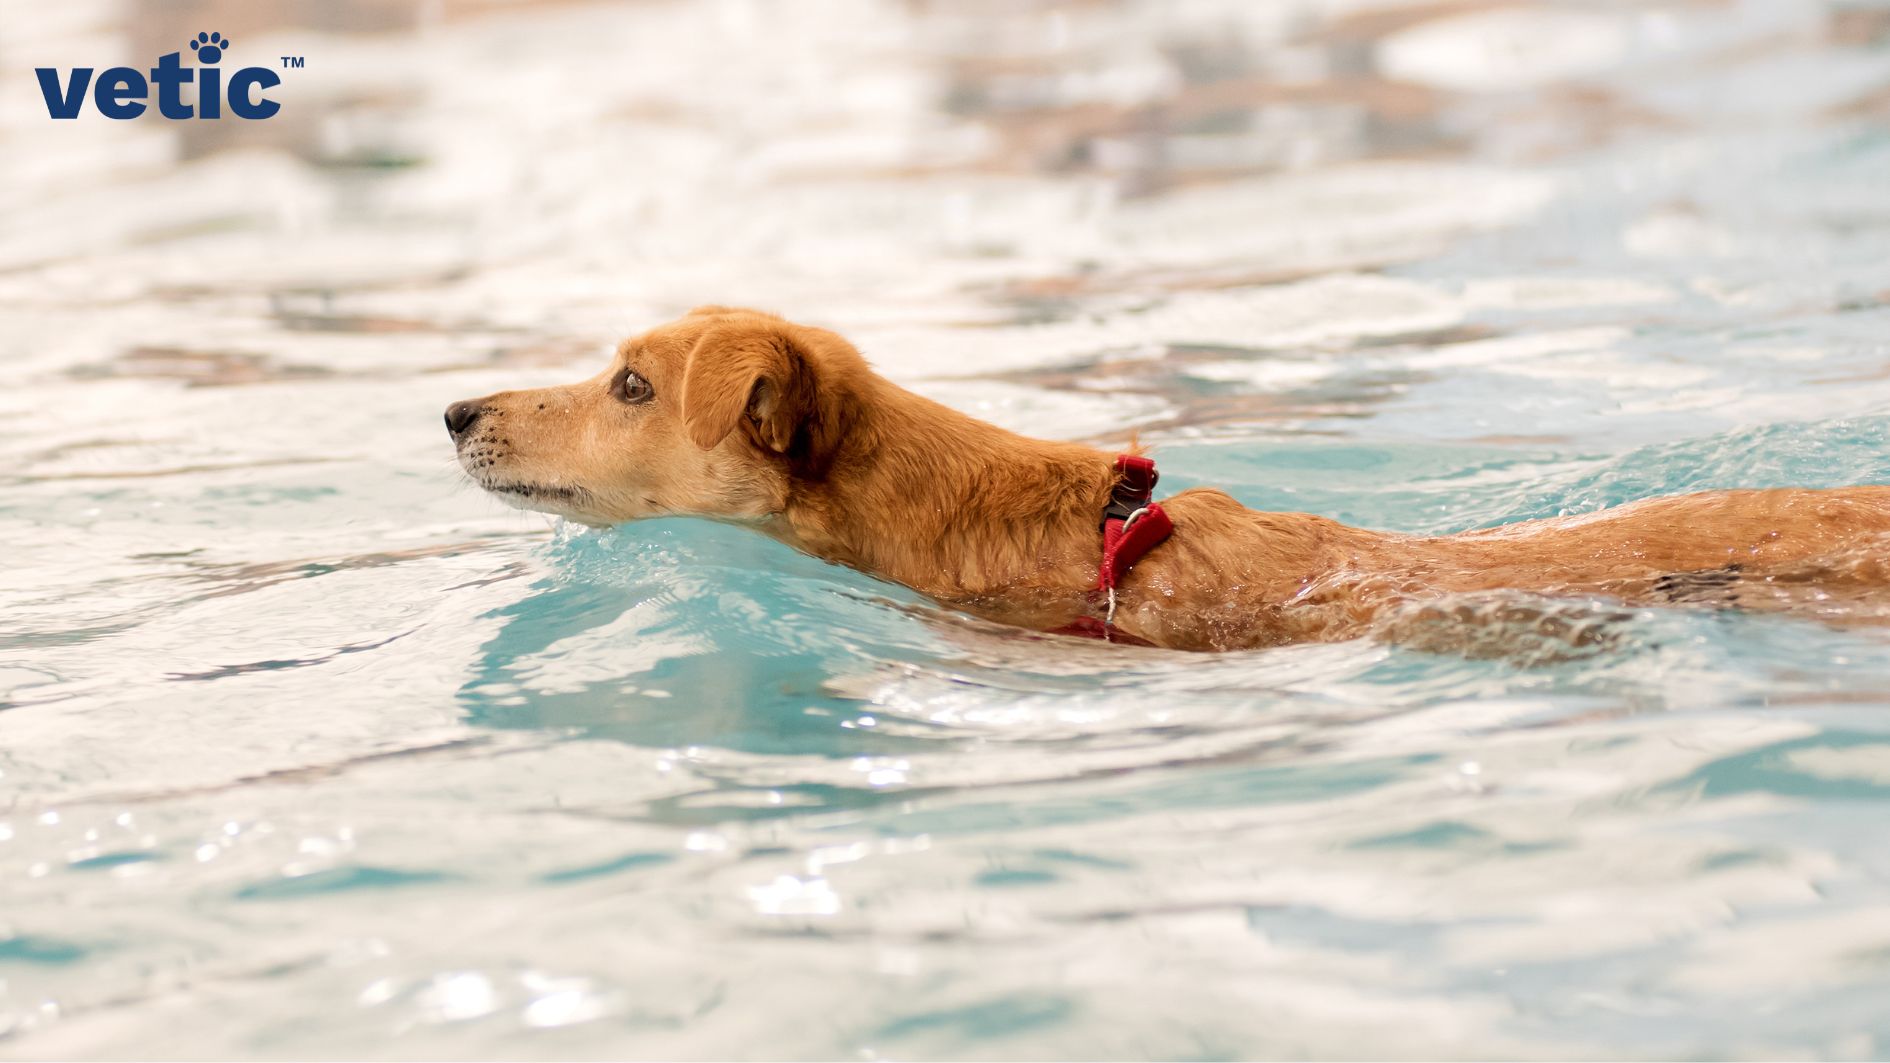 A mixed breed dog with short brown fur, brown eyes and wearing red collar swimming. Hydrotherapy is a recommended exercise for dogs with hip dysplasia, recovering from limb surgeries and arthritis in dogs.